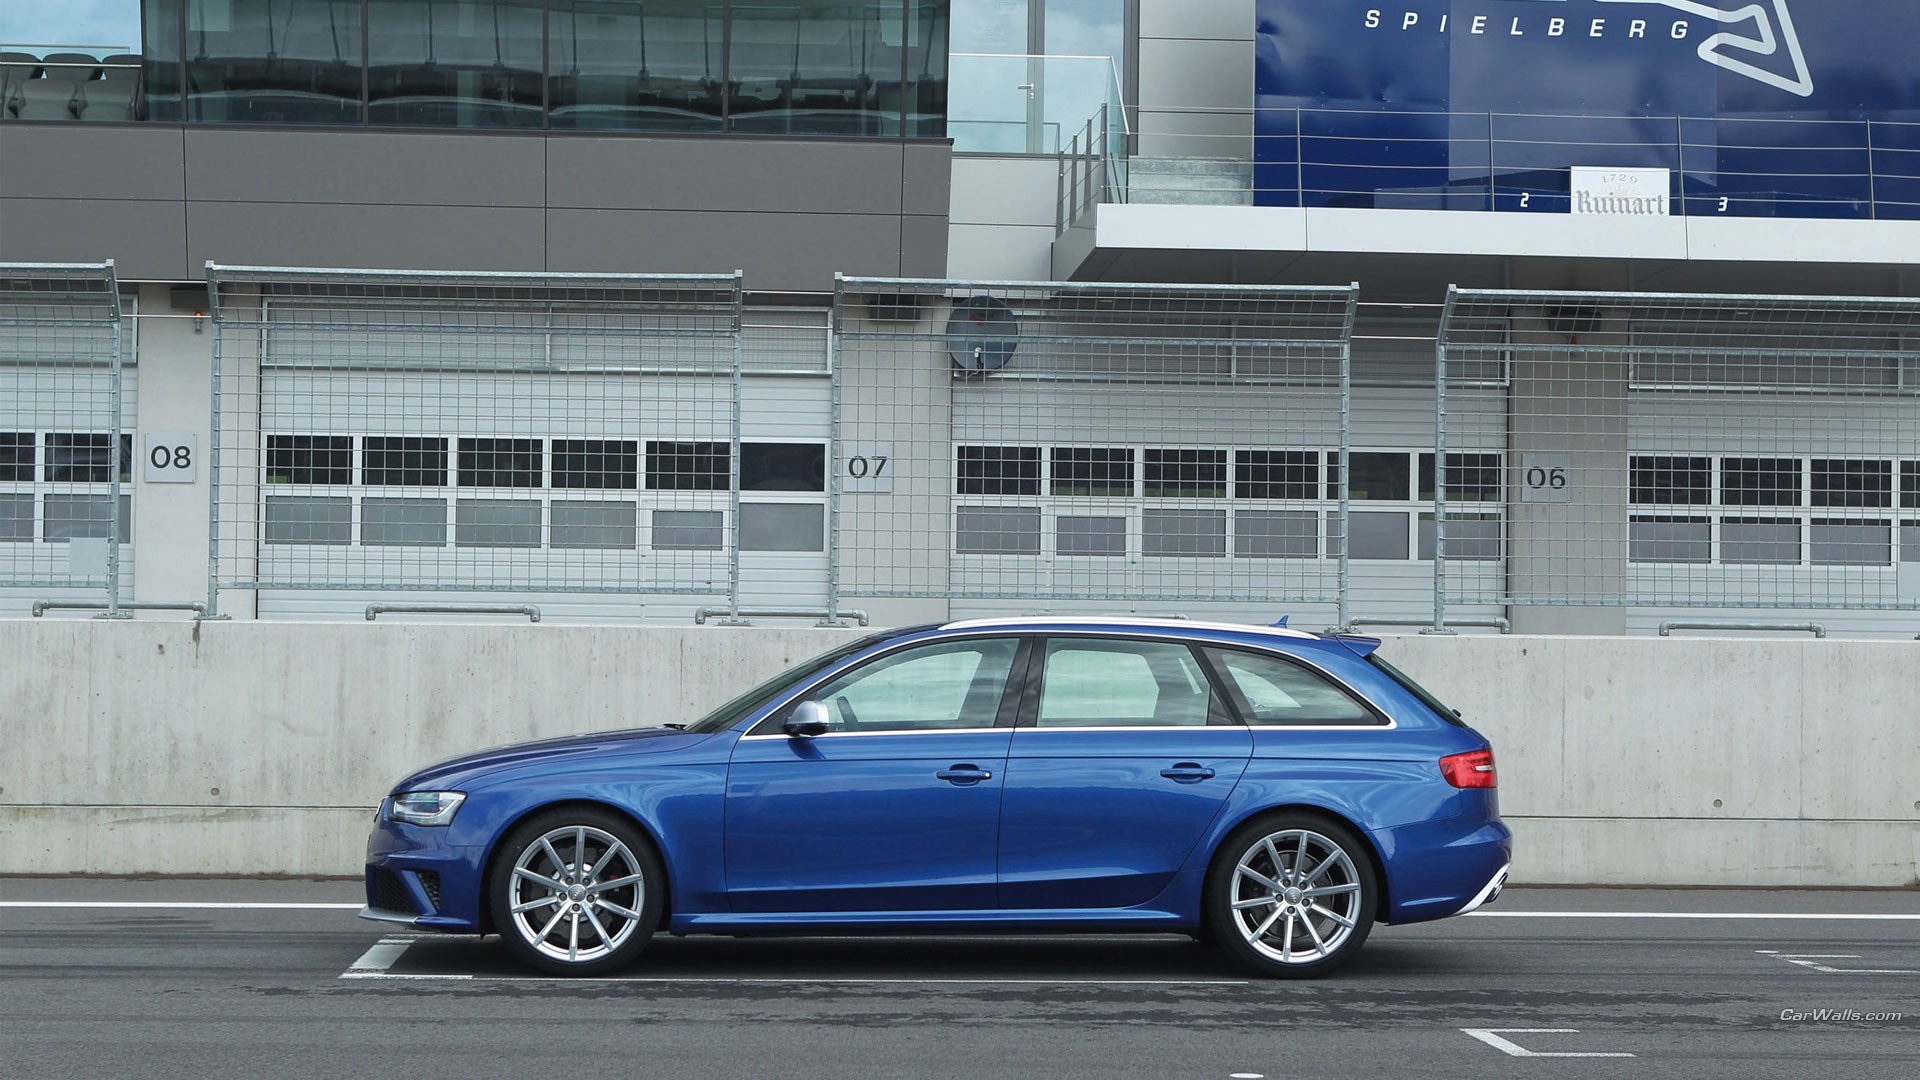 General 1920x1080 Audi RS4 Audi blue cars vehicle car station wagon German cars Volkswagen Group